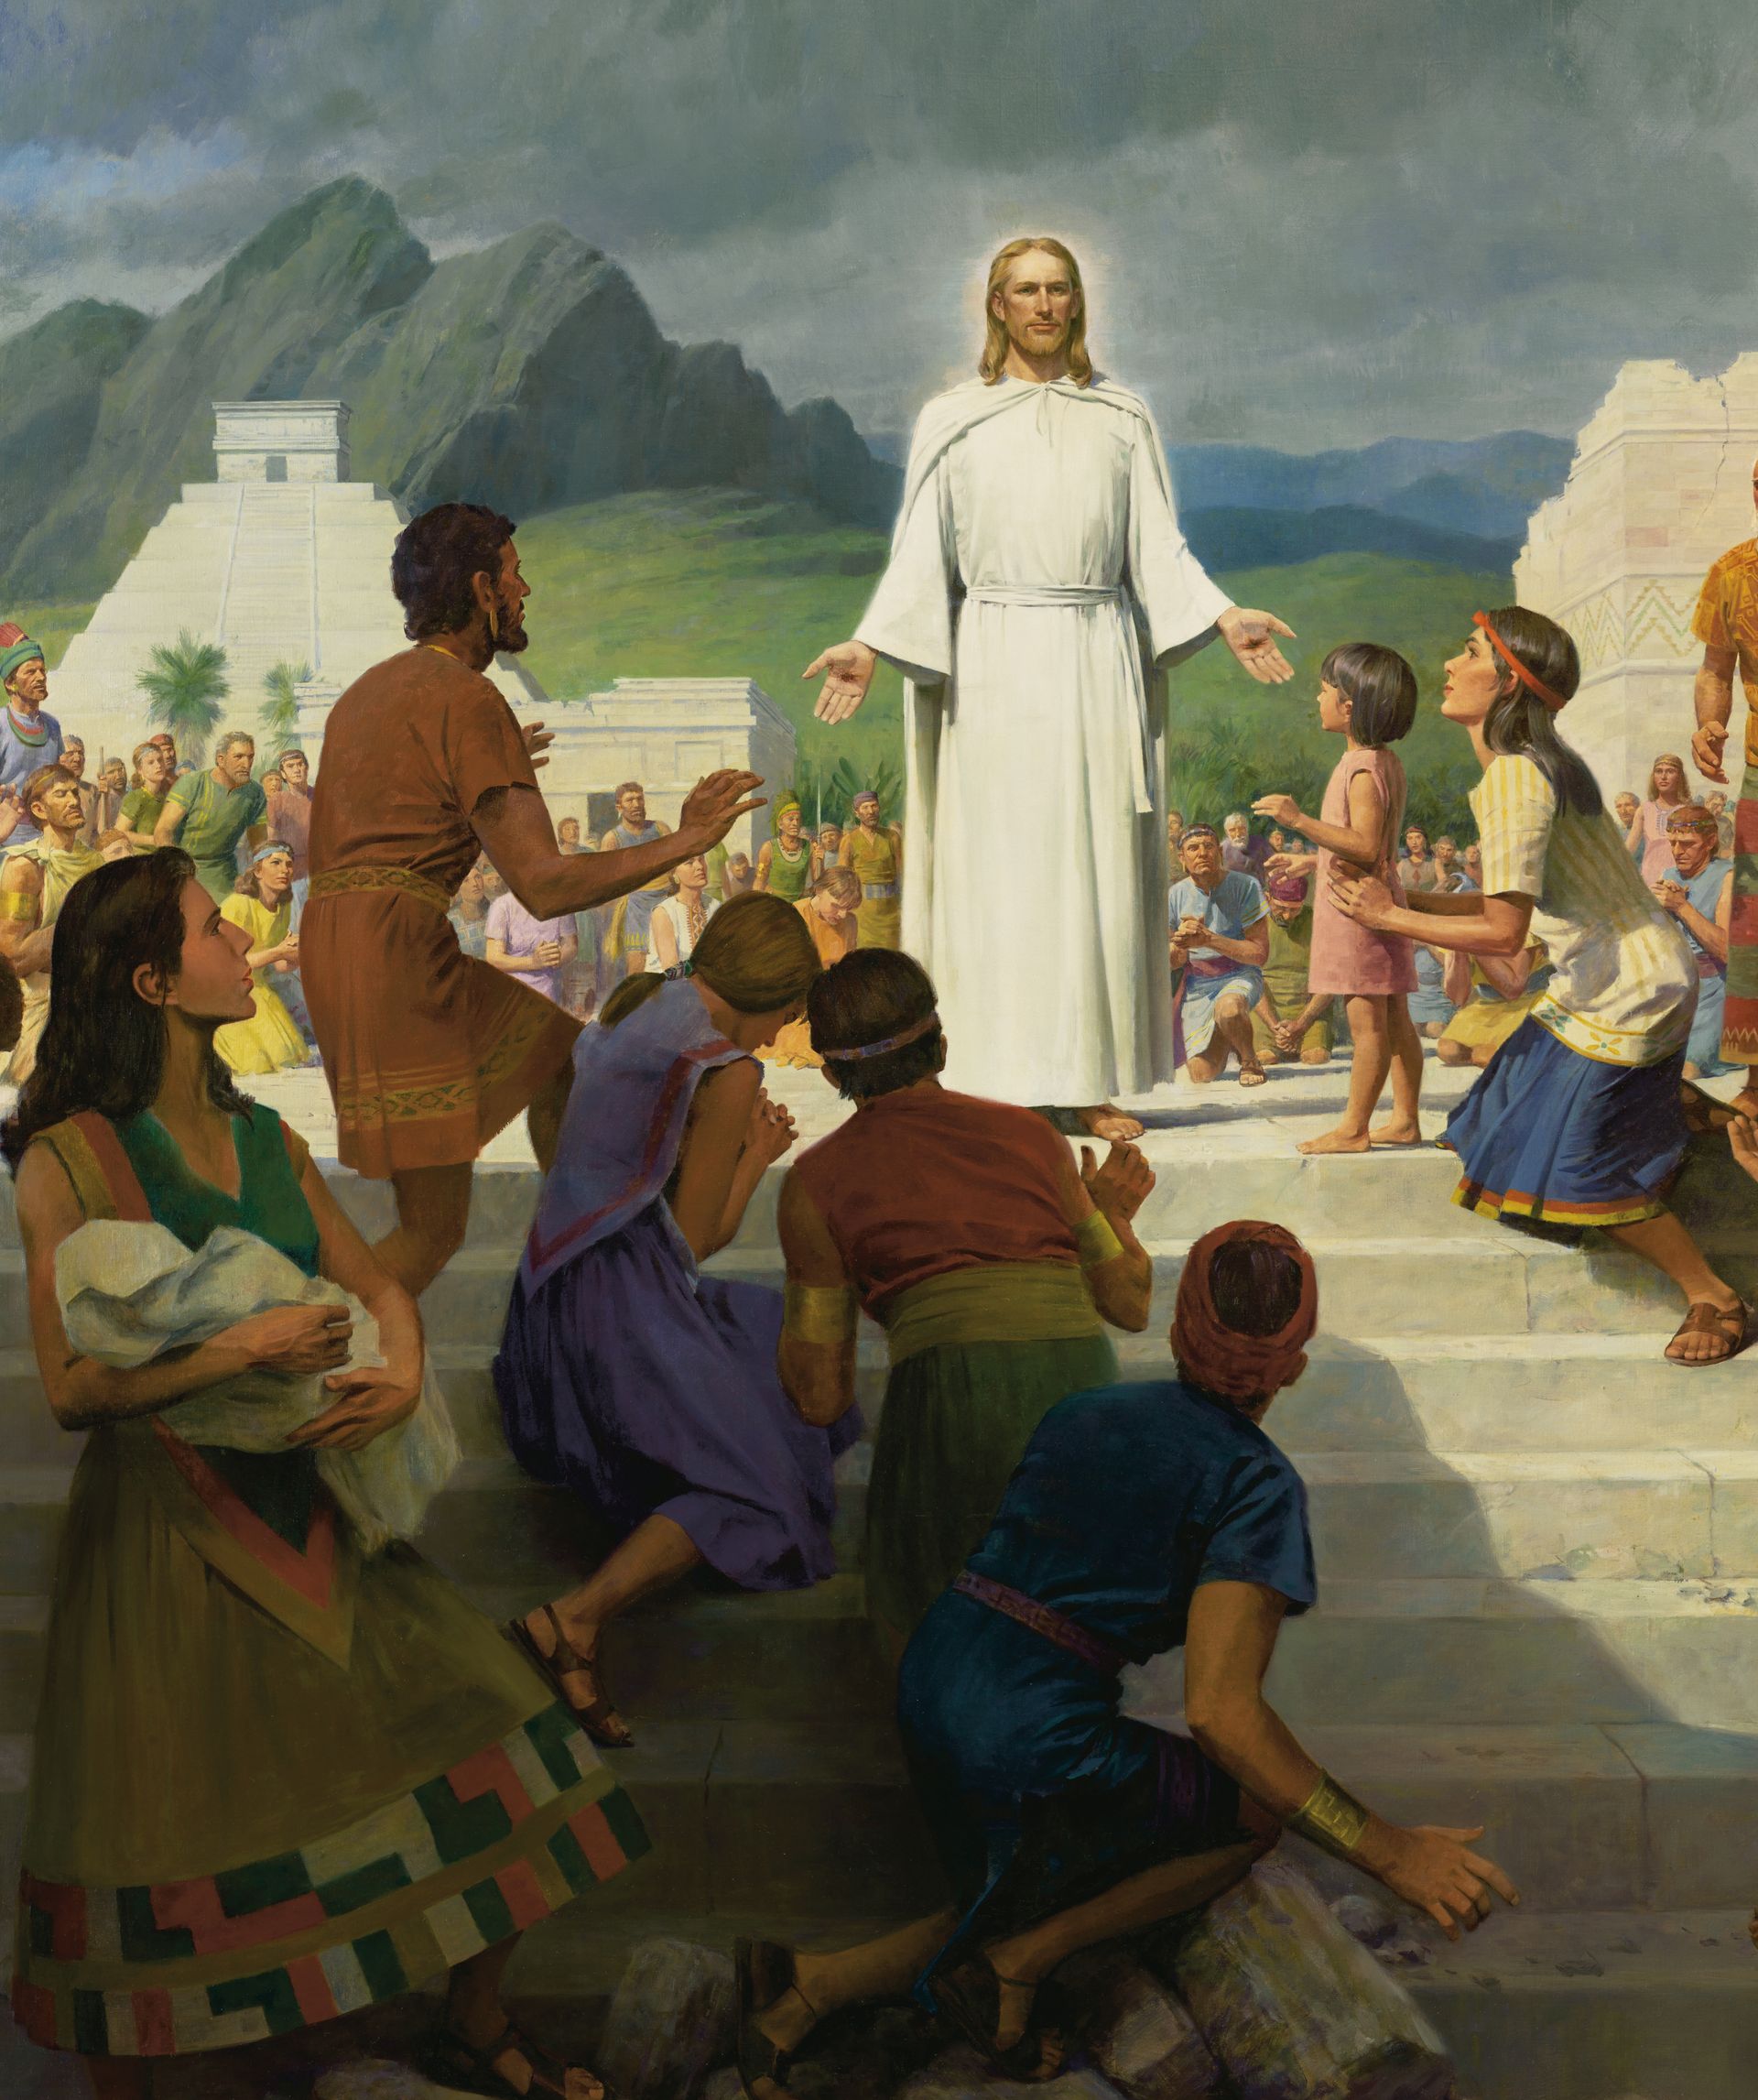 A detail from Jesus Christ Visits the Americas, by John Scott